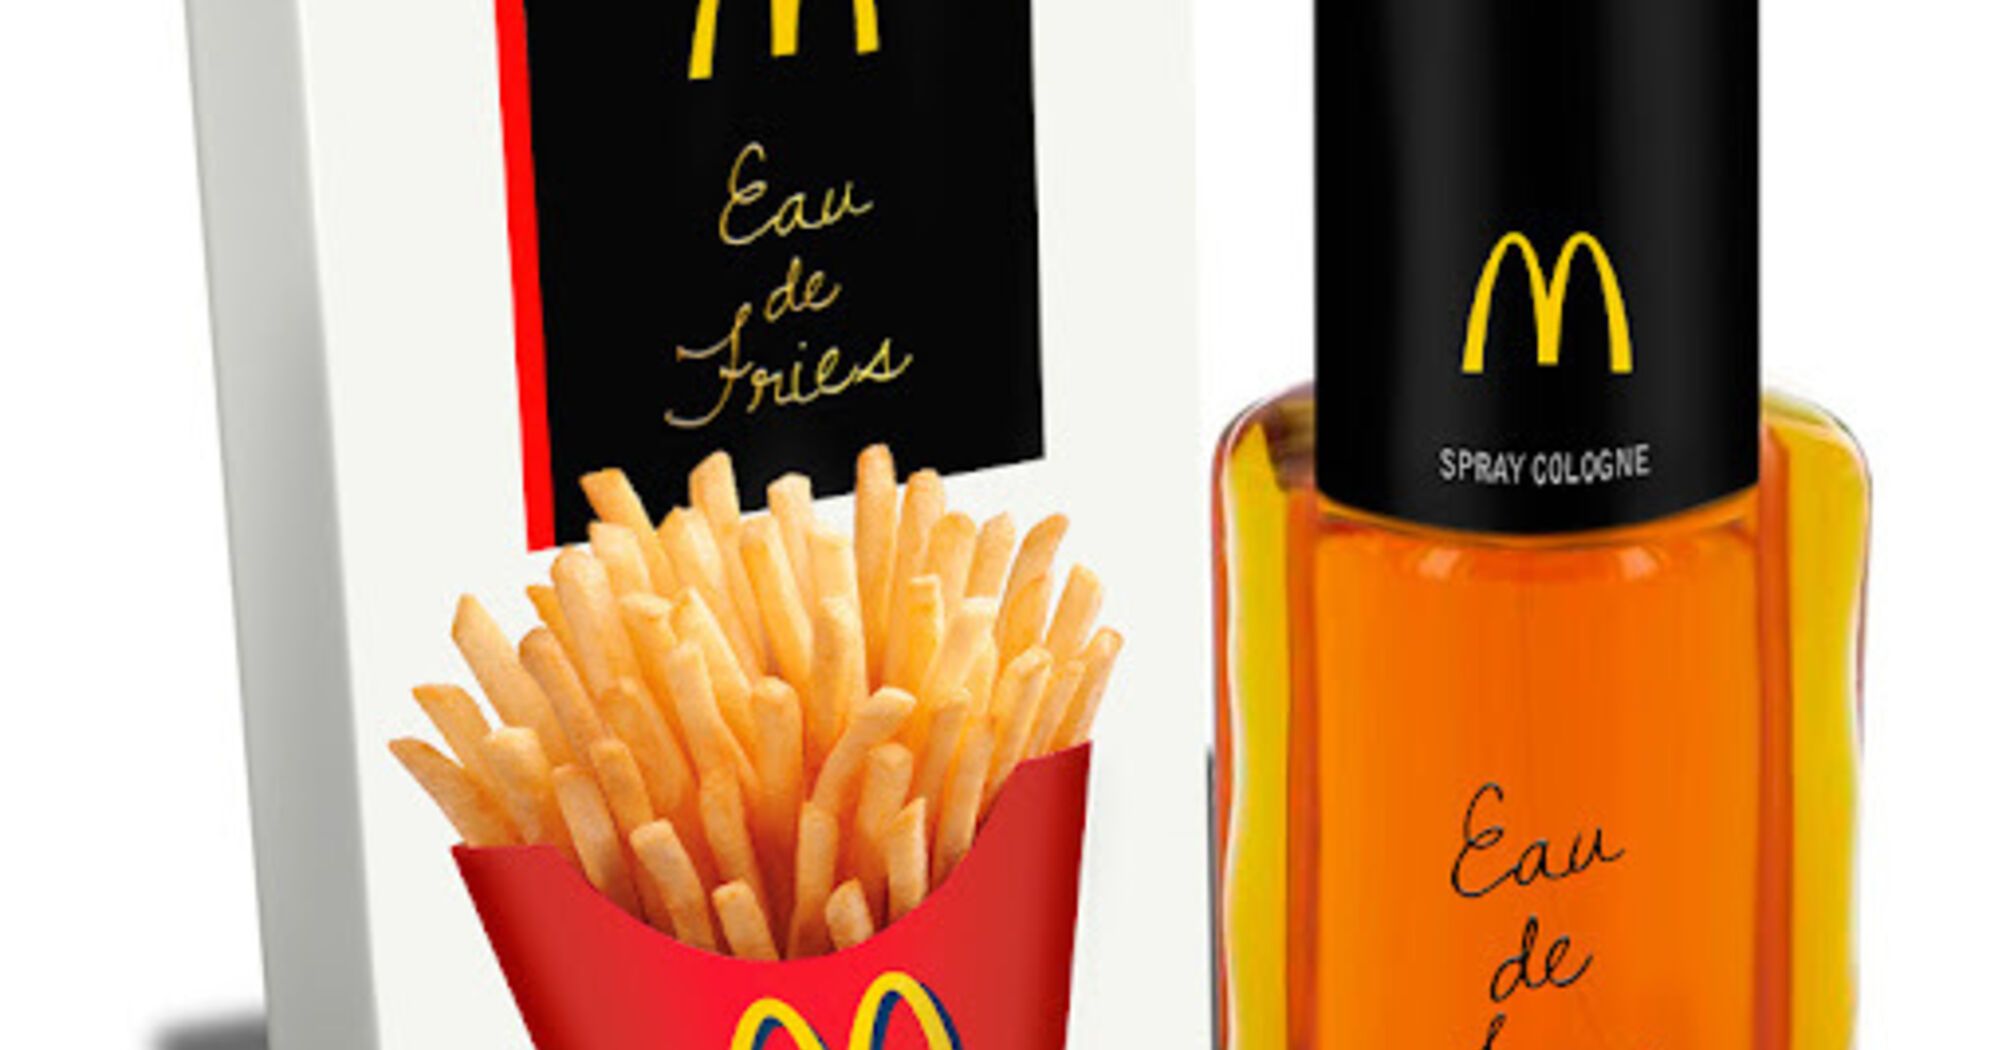 A perfume with the flavor of French fries